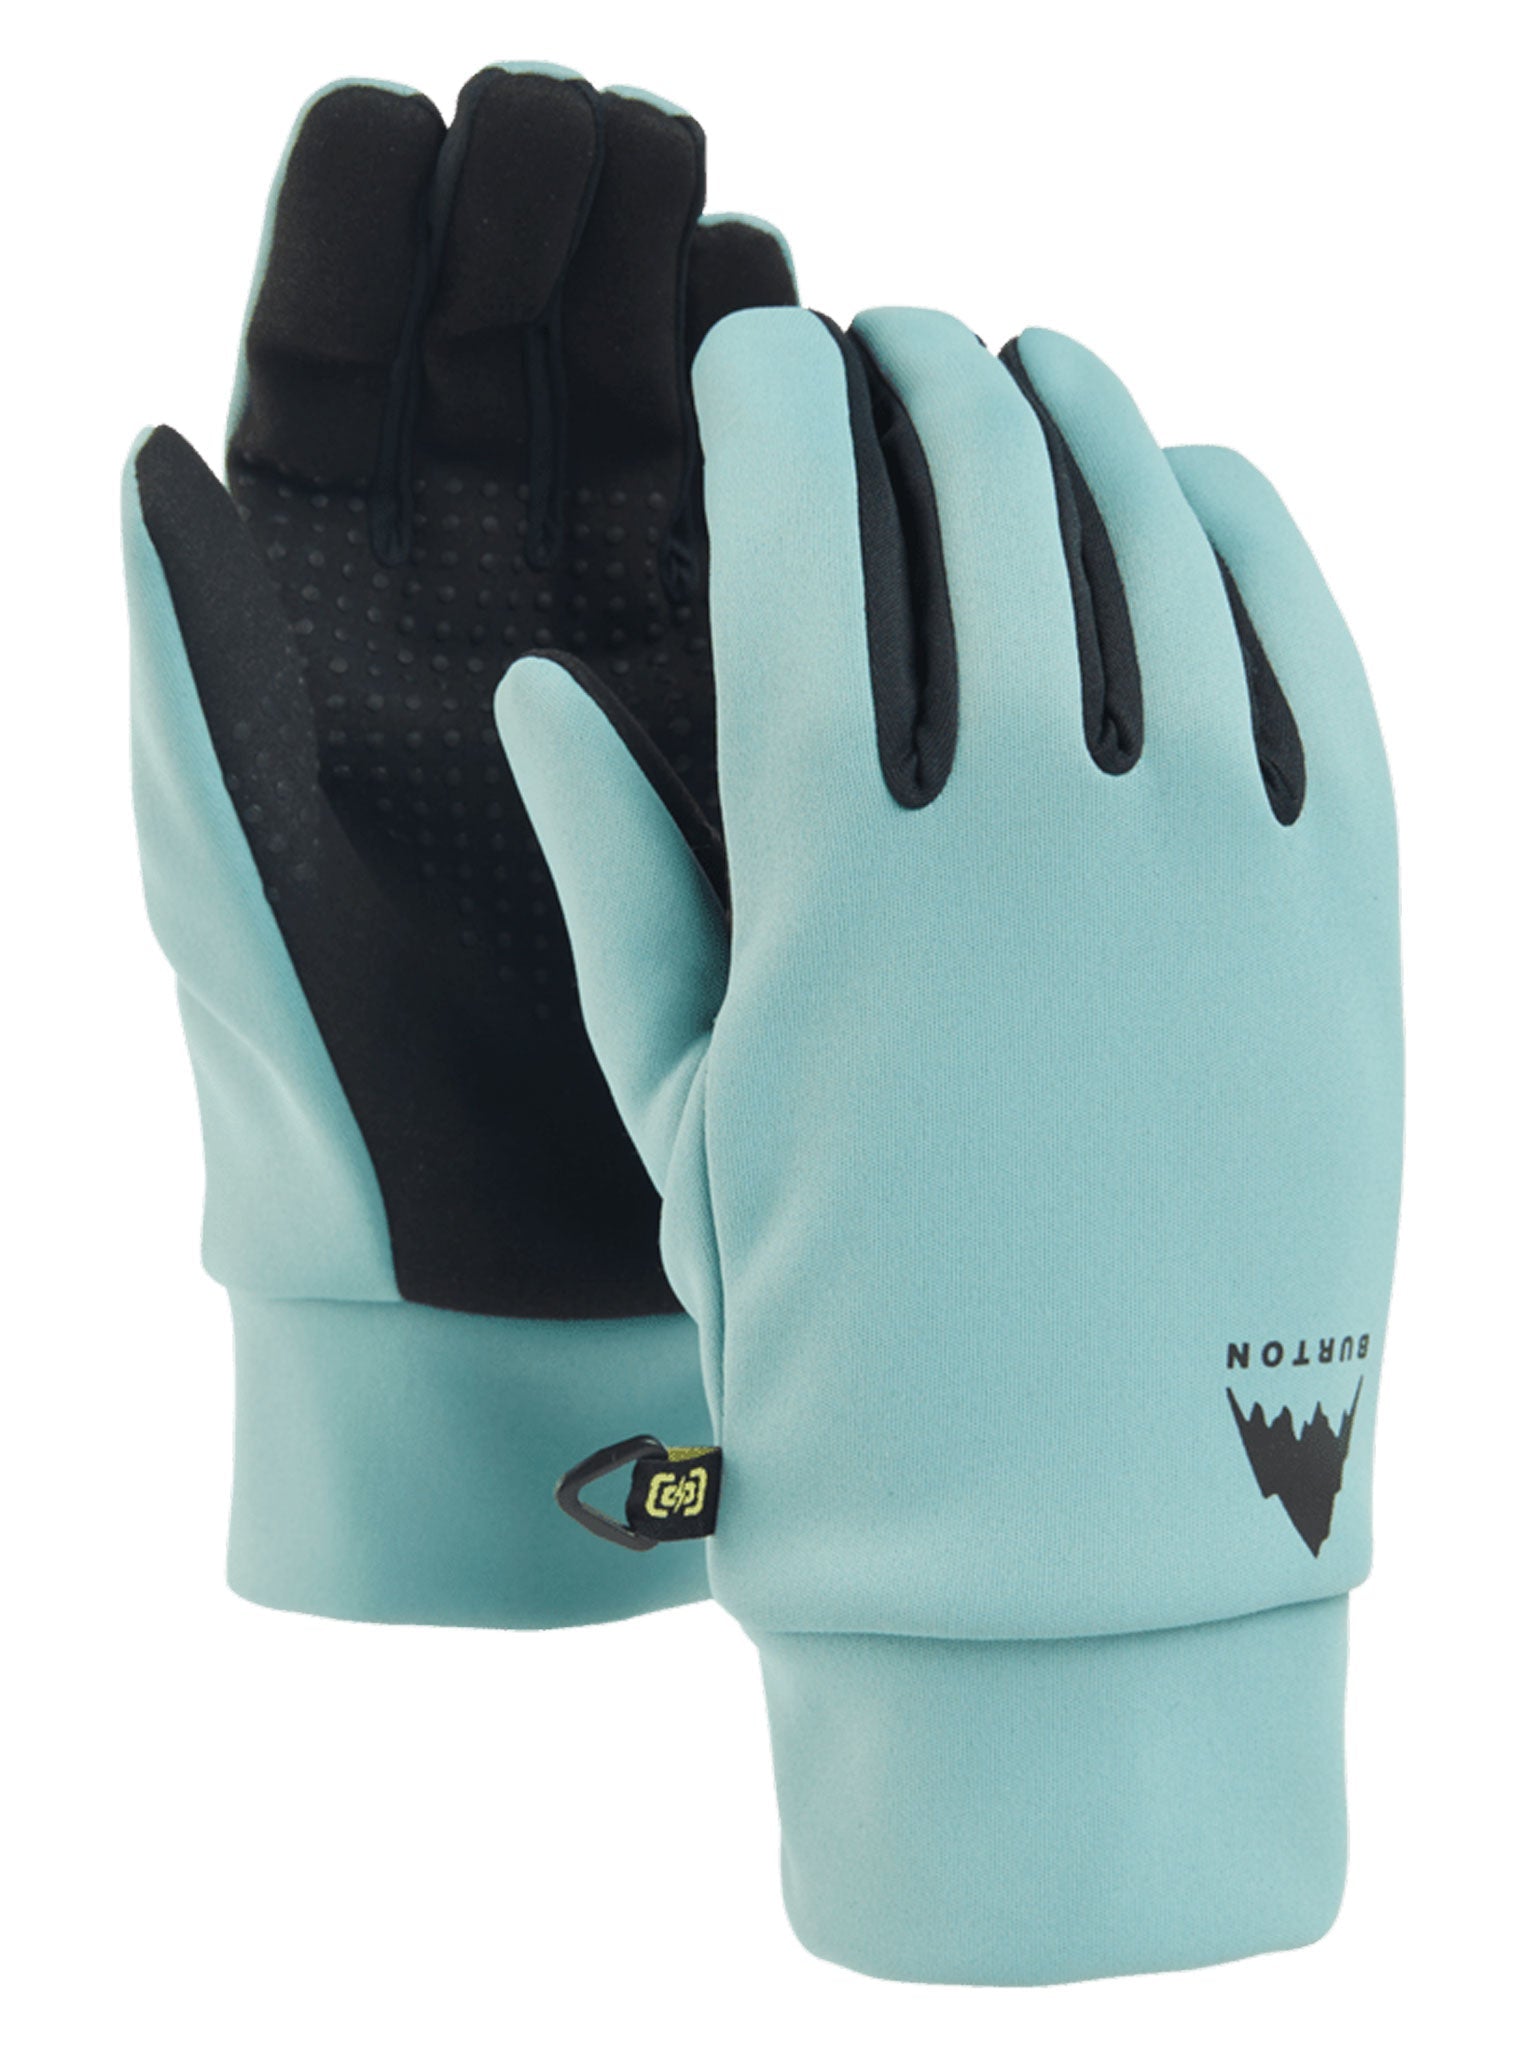 Women's Touch-N-Go Glove Liners